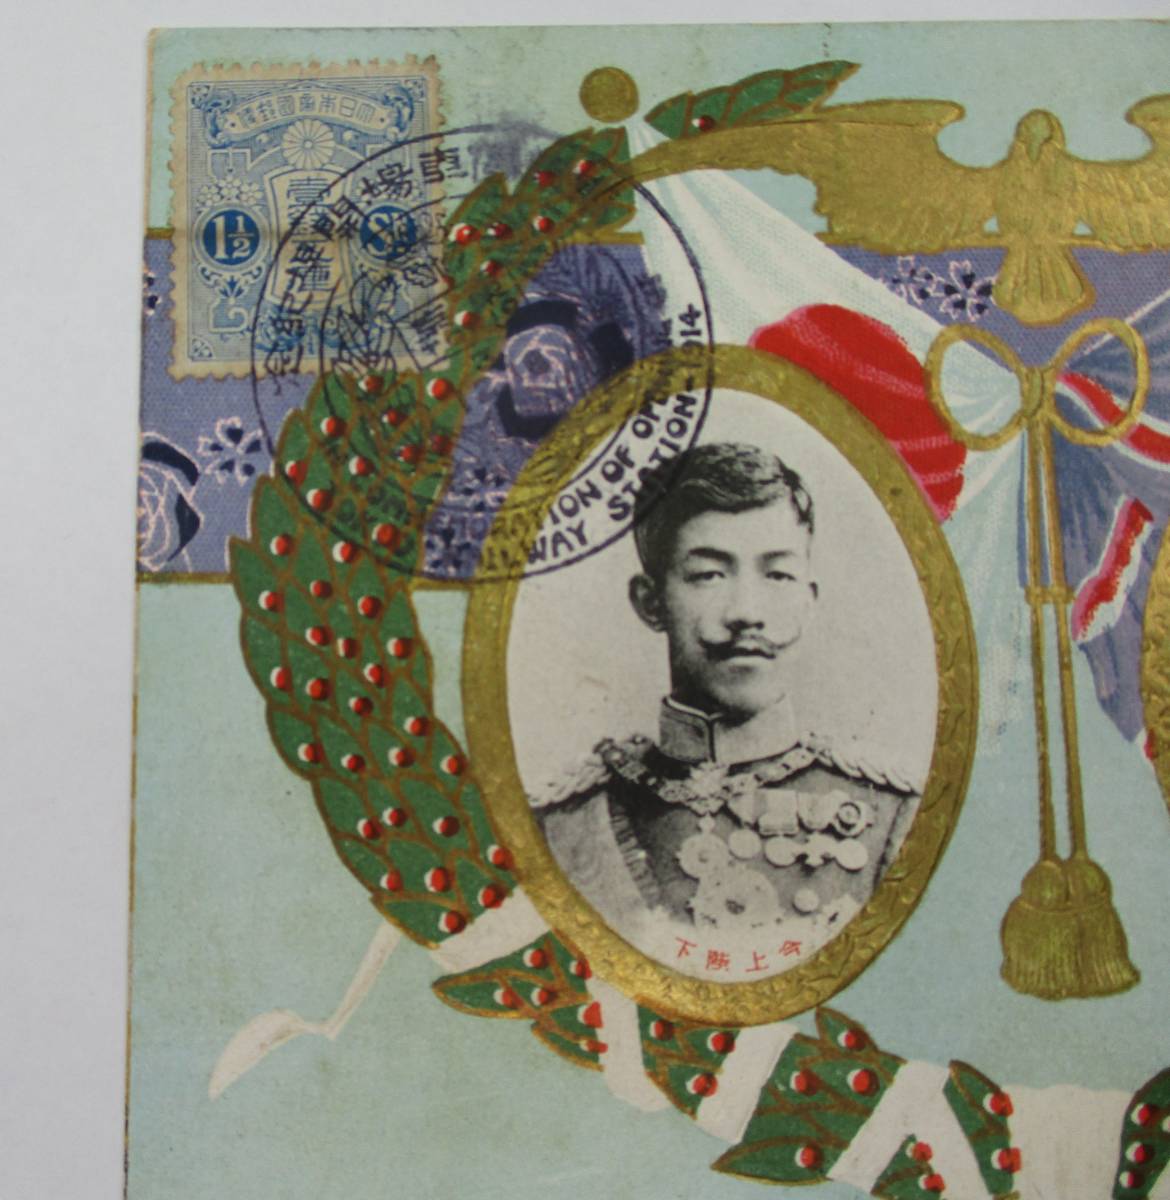 K-811 Tokyo . car place . place memory Tokyo Taisho 3 year 12 month 18 day stamp 1 sen 5. rin stamp pushed seal mail postcard now on . under britain . emperor picture postcard 